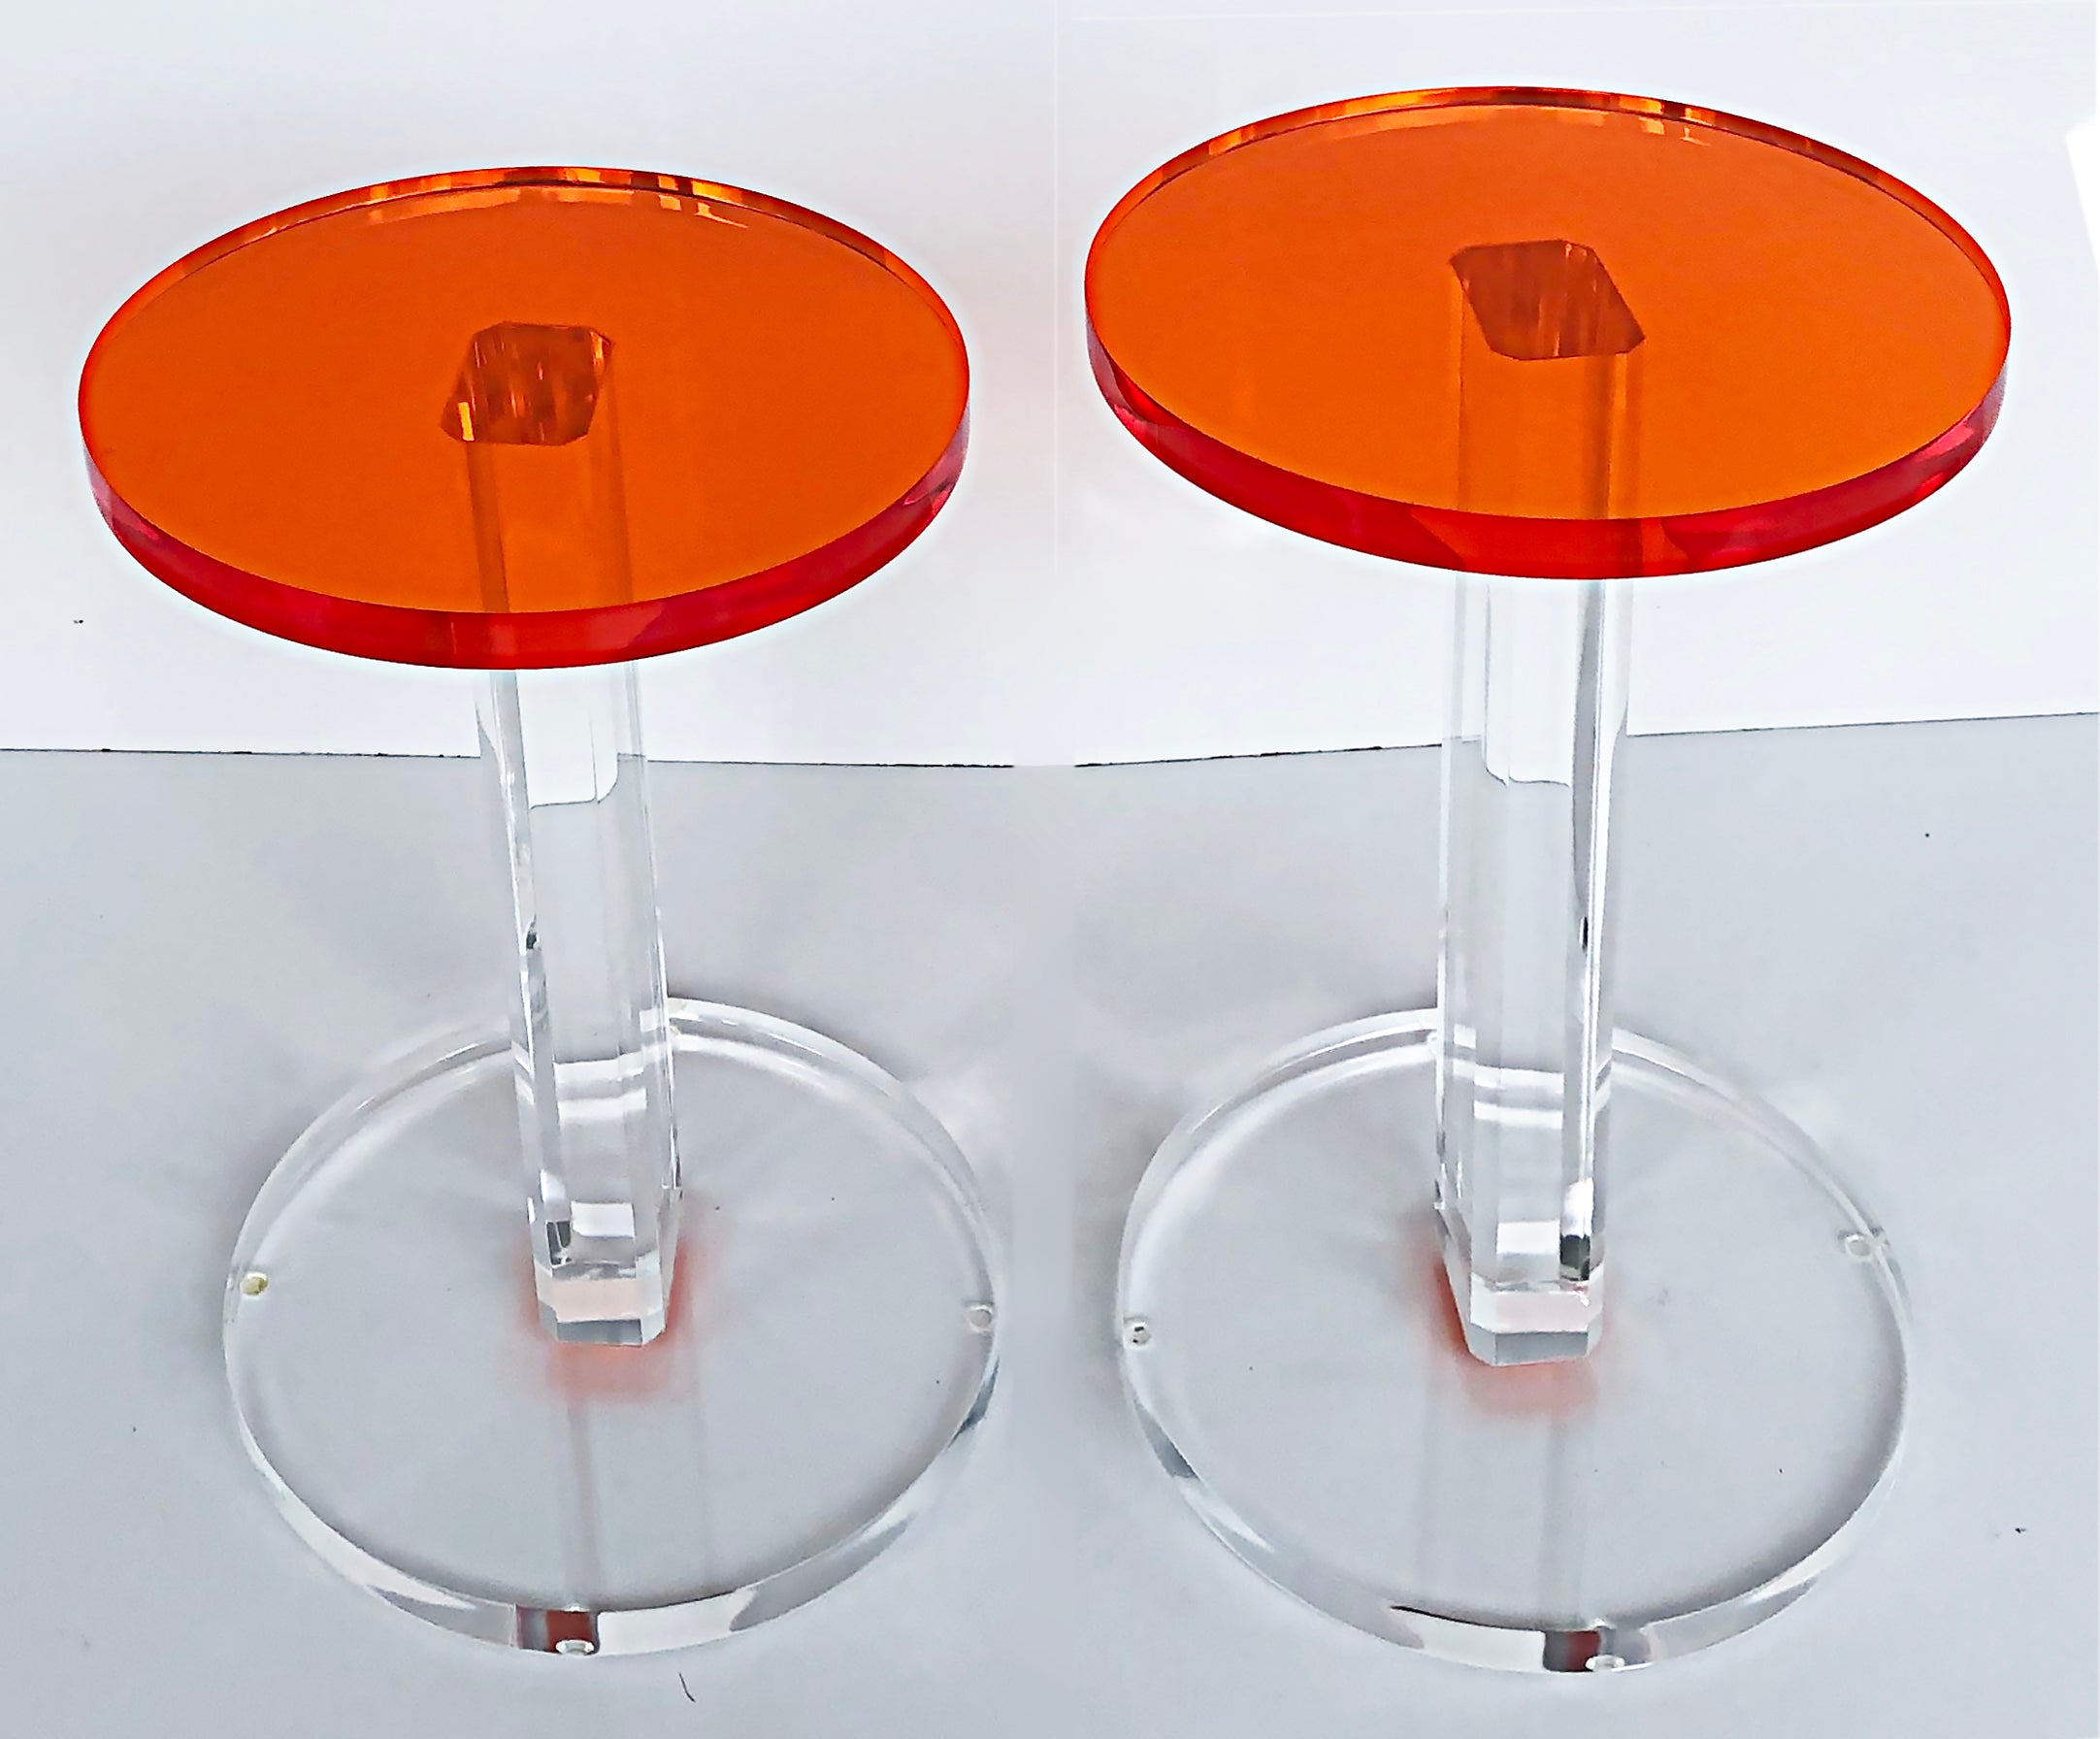 Iconic Design Gallery Custom-Made Lucite Side Tables, Pair

Offered for sale is one of our original custom-made side tables in orange and clear lucite. The tables are slightly different sizes with the height of the lower table is 20.13